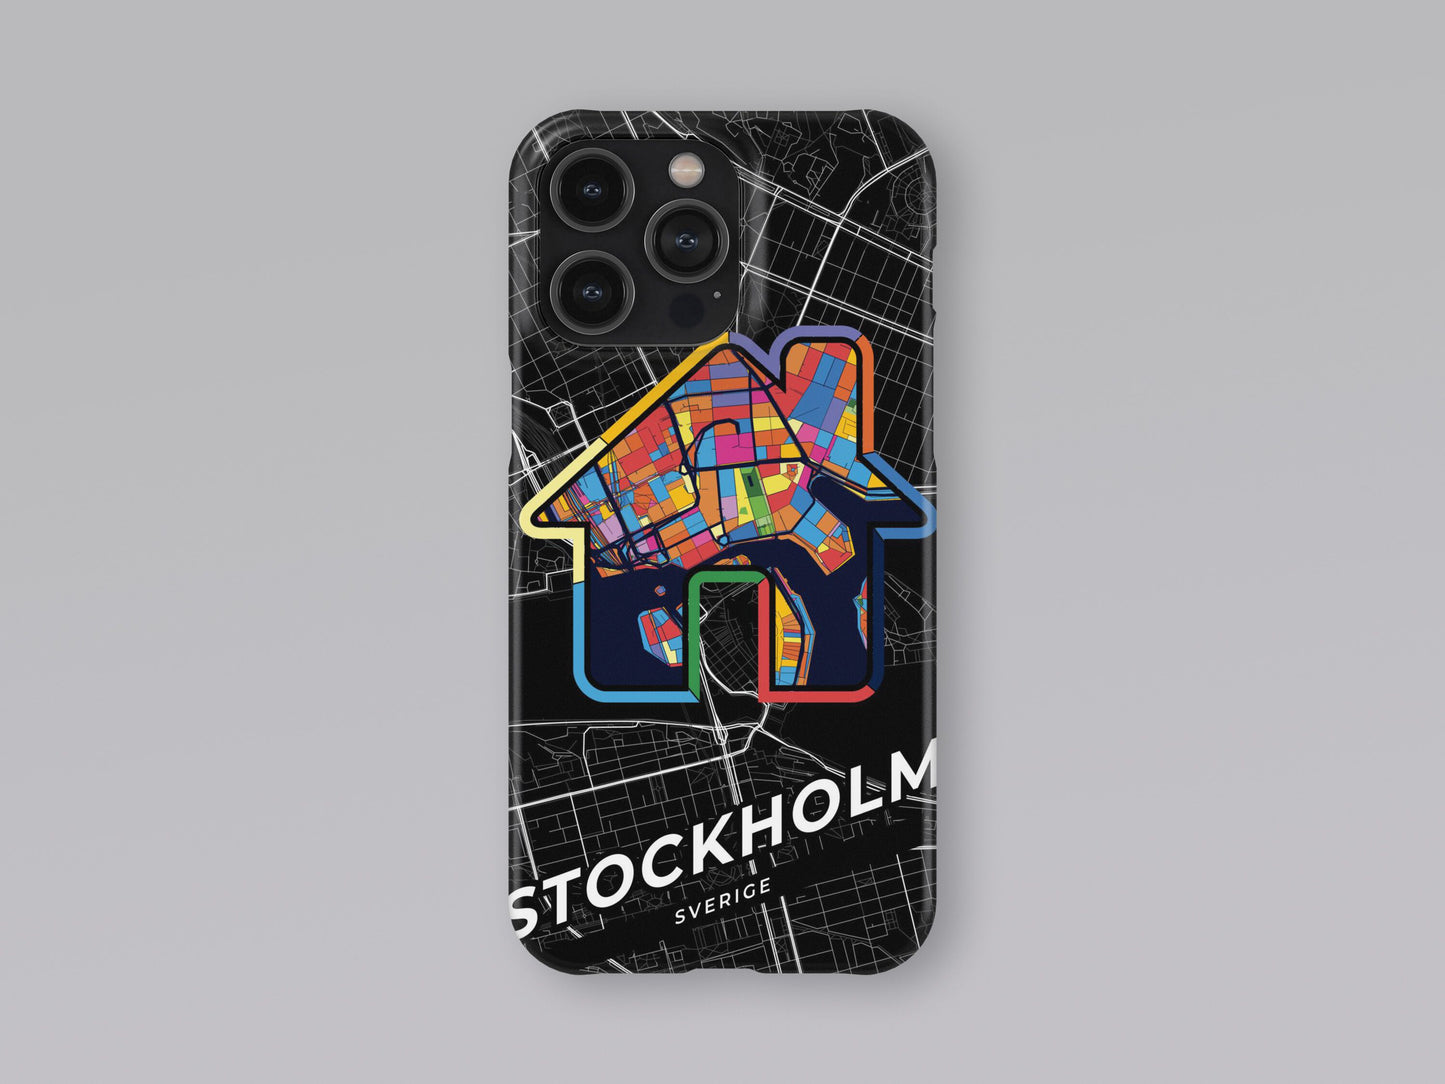 Stockholm Sweden slim phone case with colorful icon 3